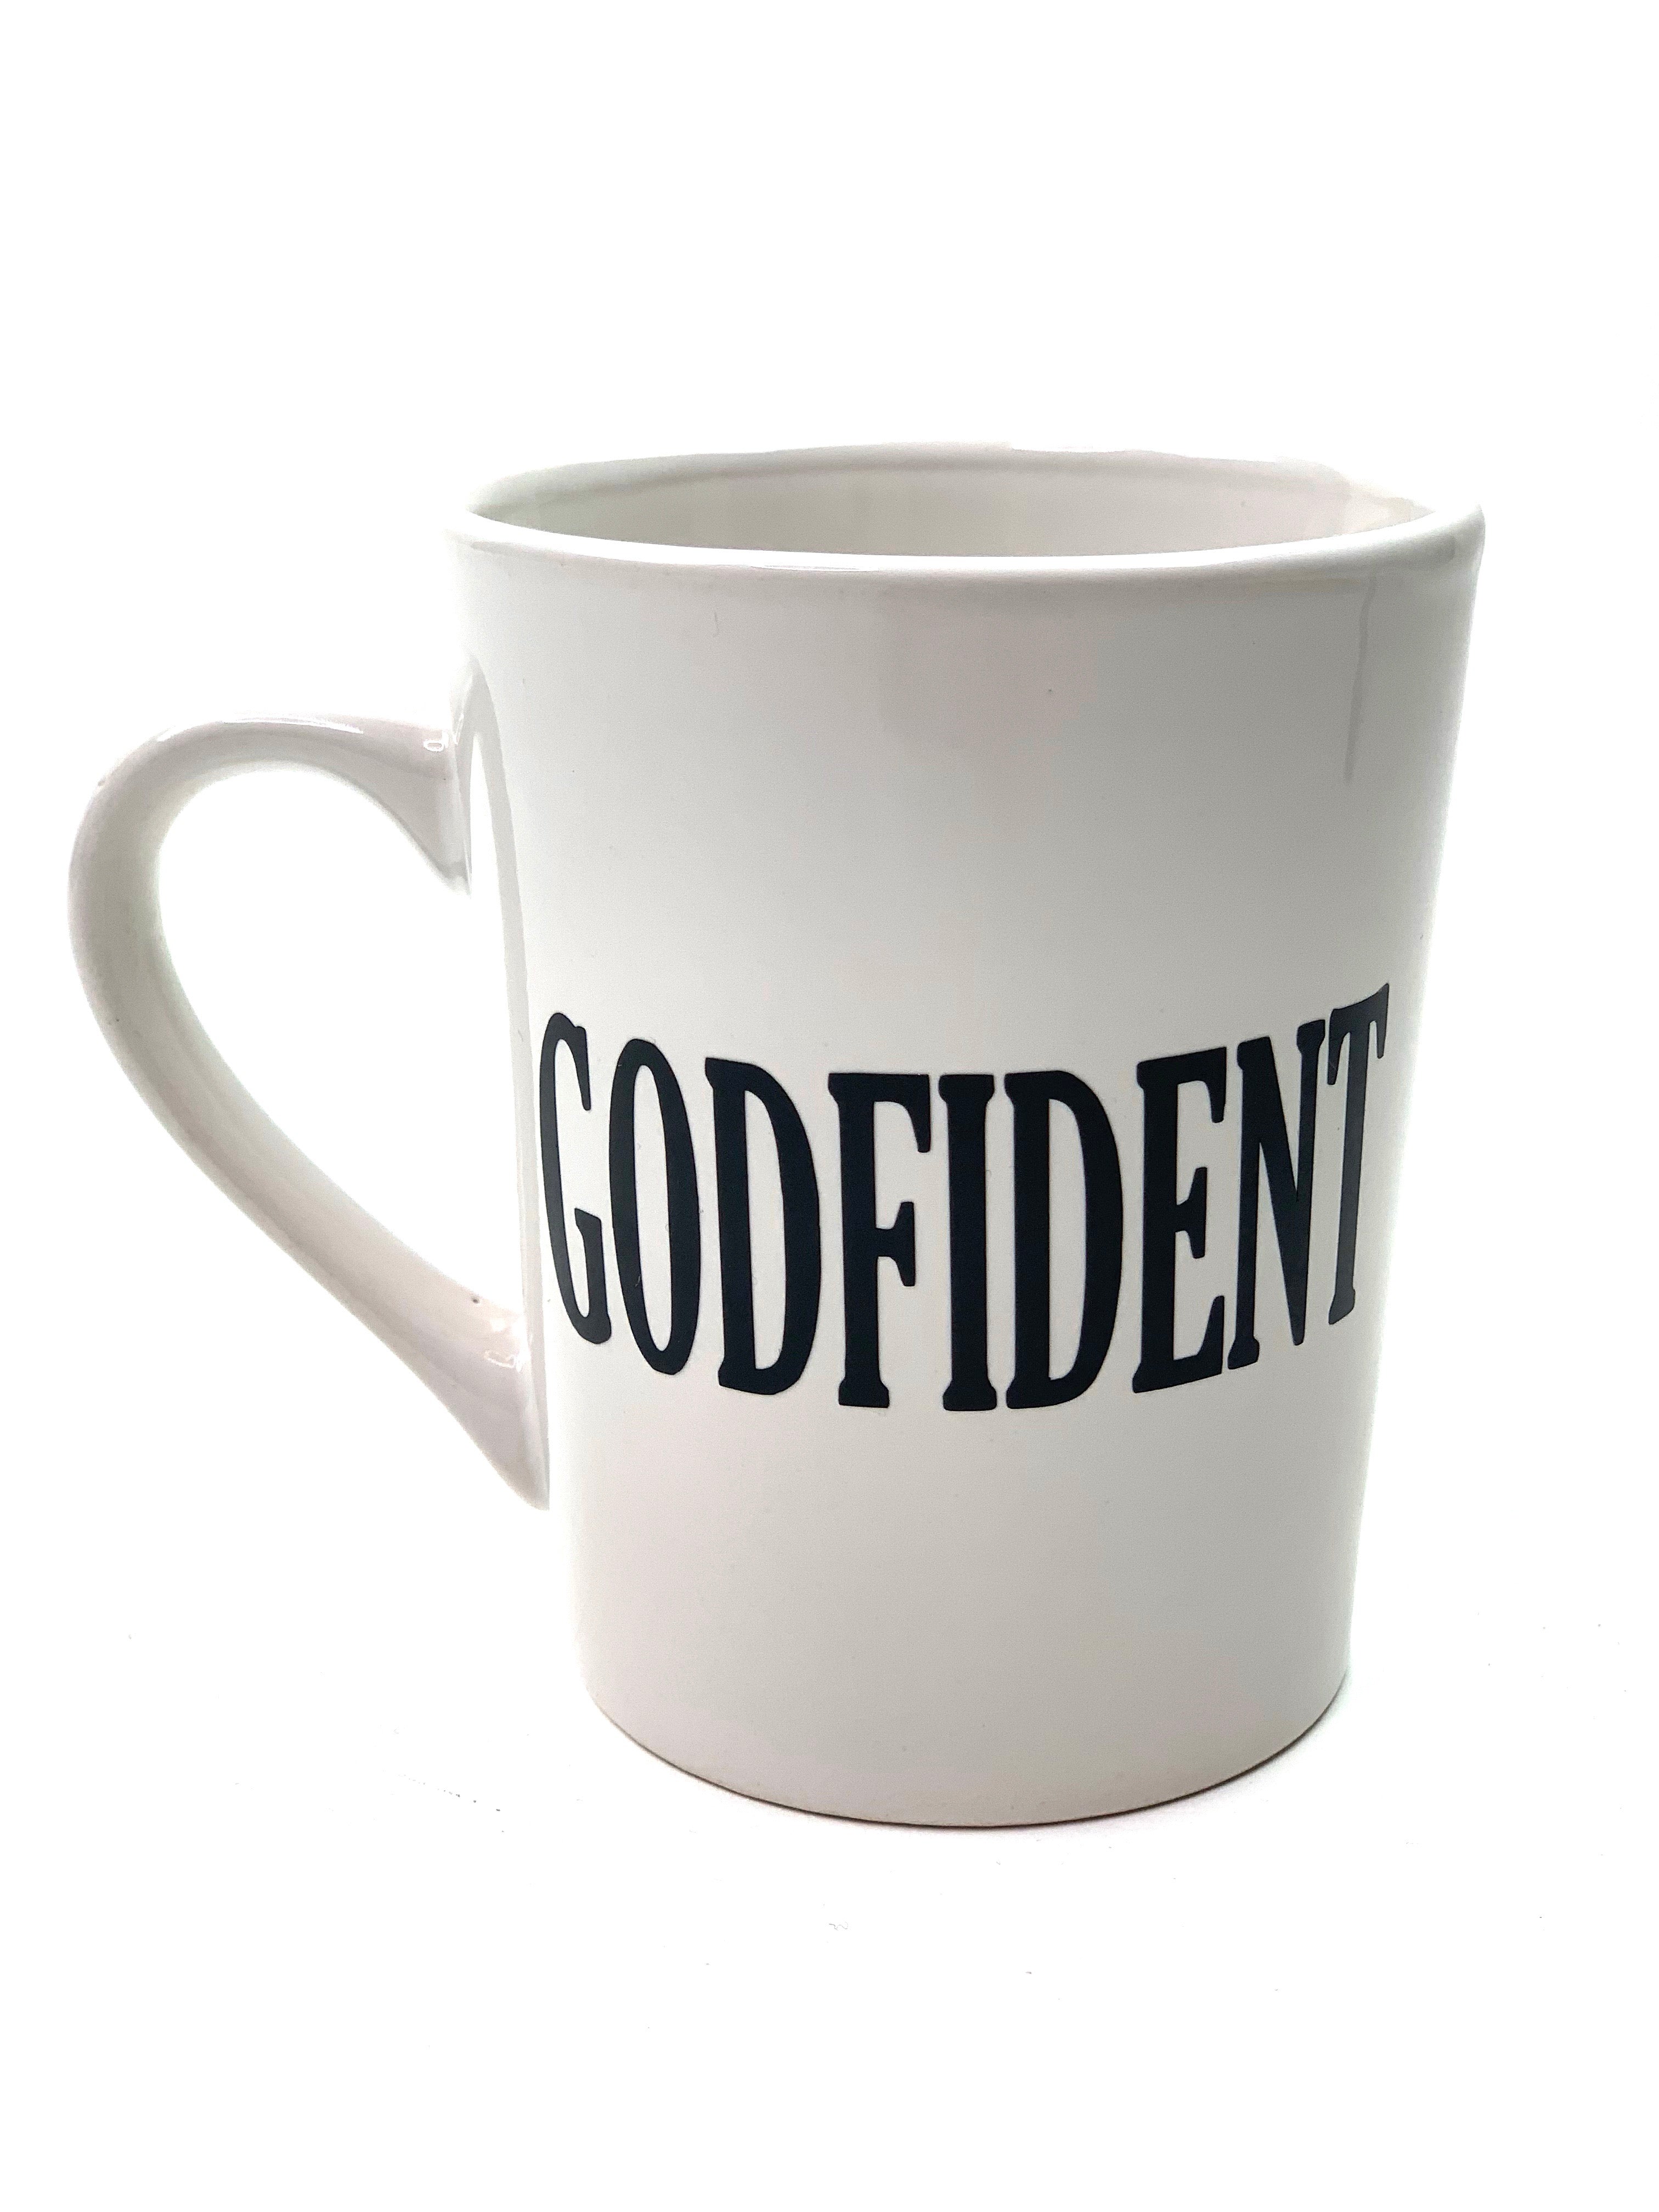 Godfident Mug - Jewellery Unique Gifts & Accessories